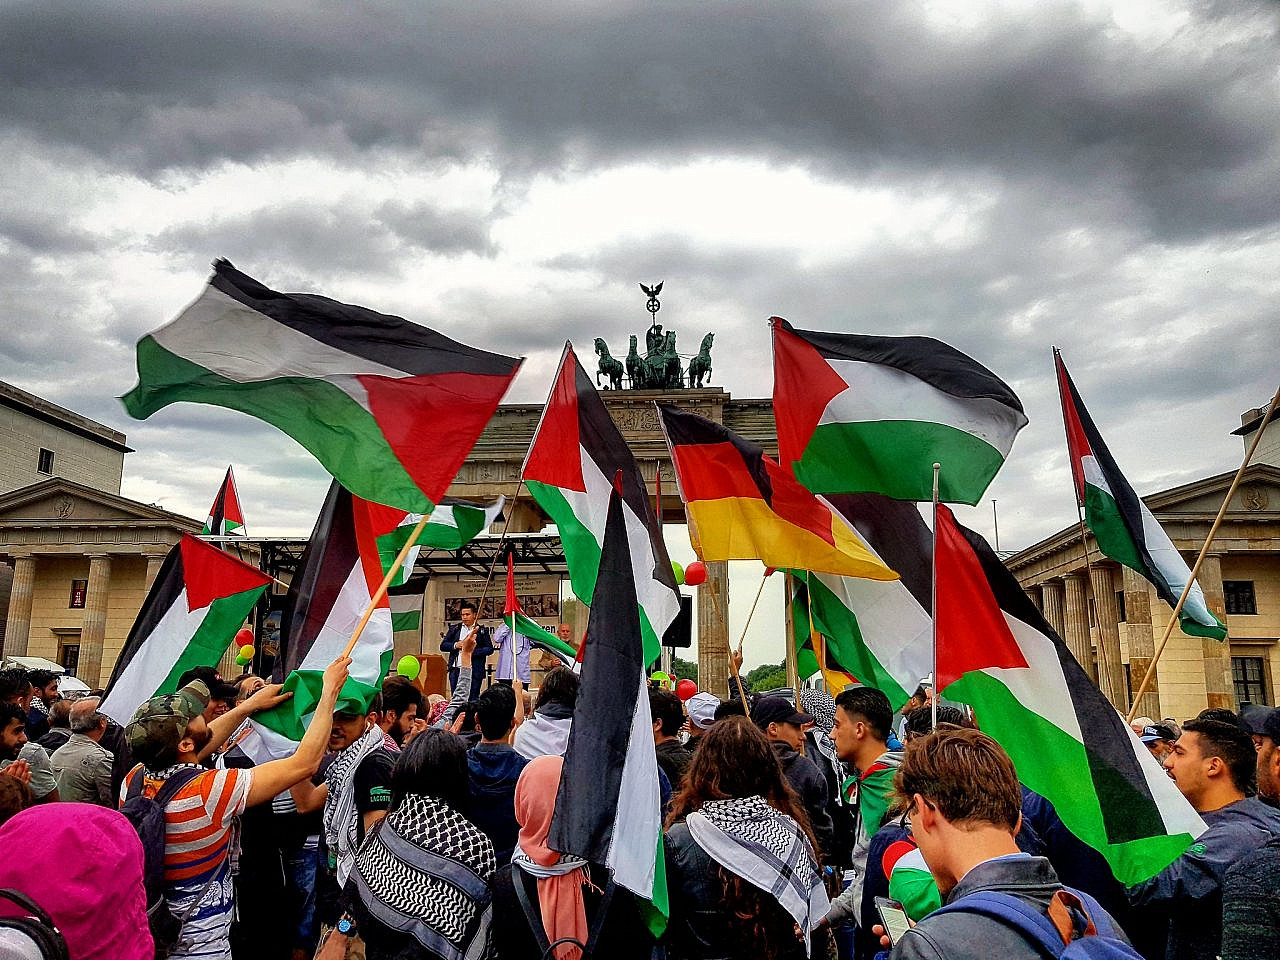 Palestine solidarity protest in Berlin, Germany, May 15, 2018. (Hossam el-Hamalawy/Flickr/CC BY 2.0)